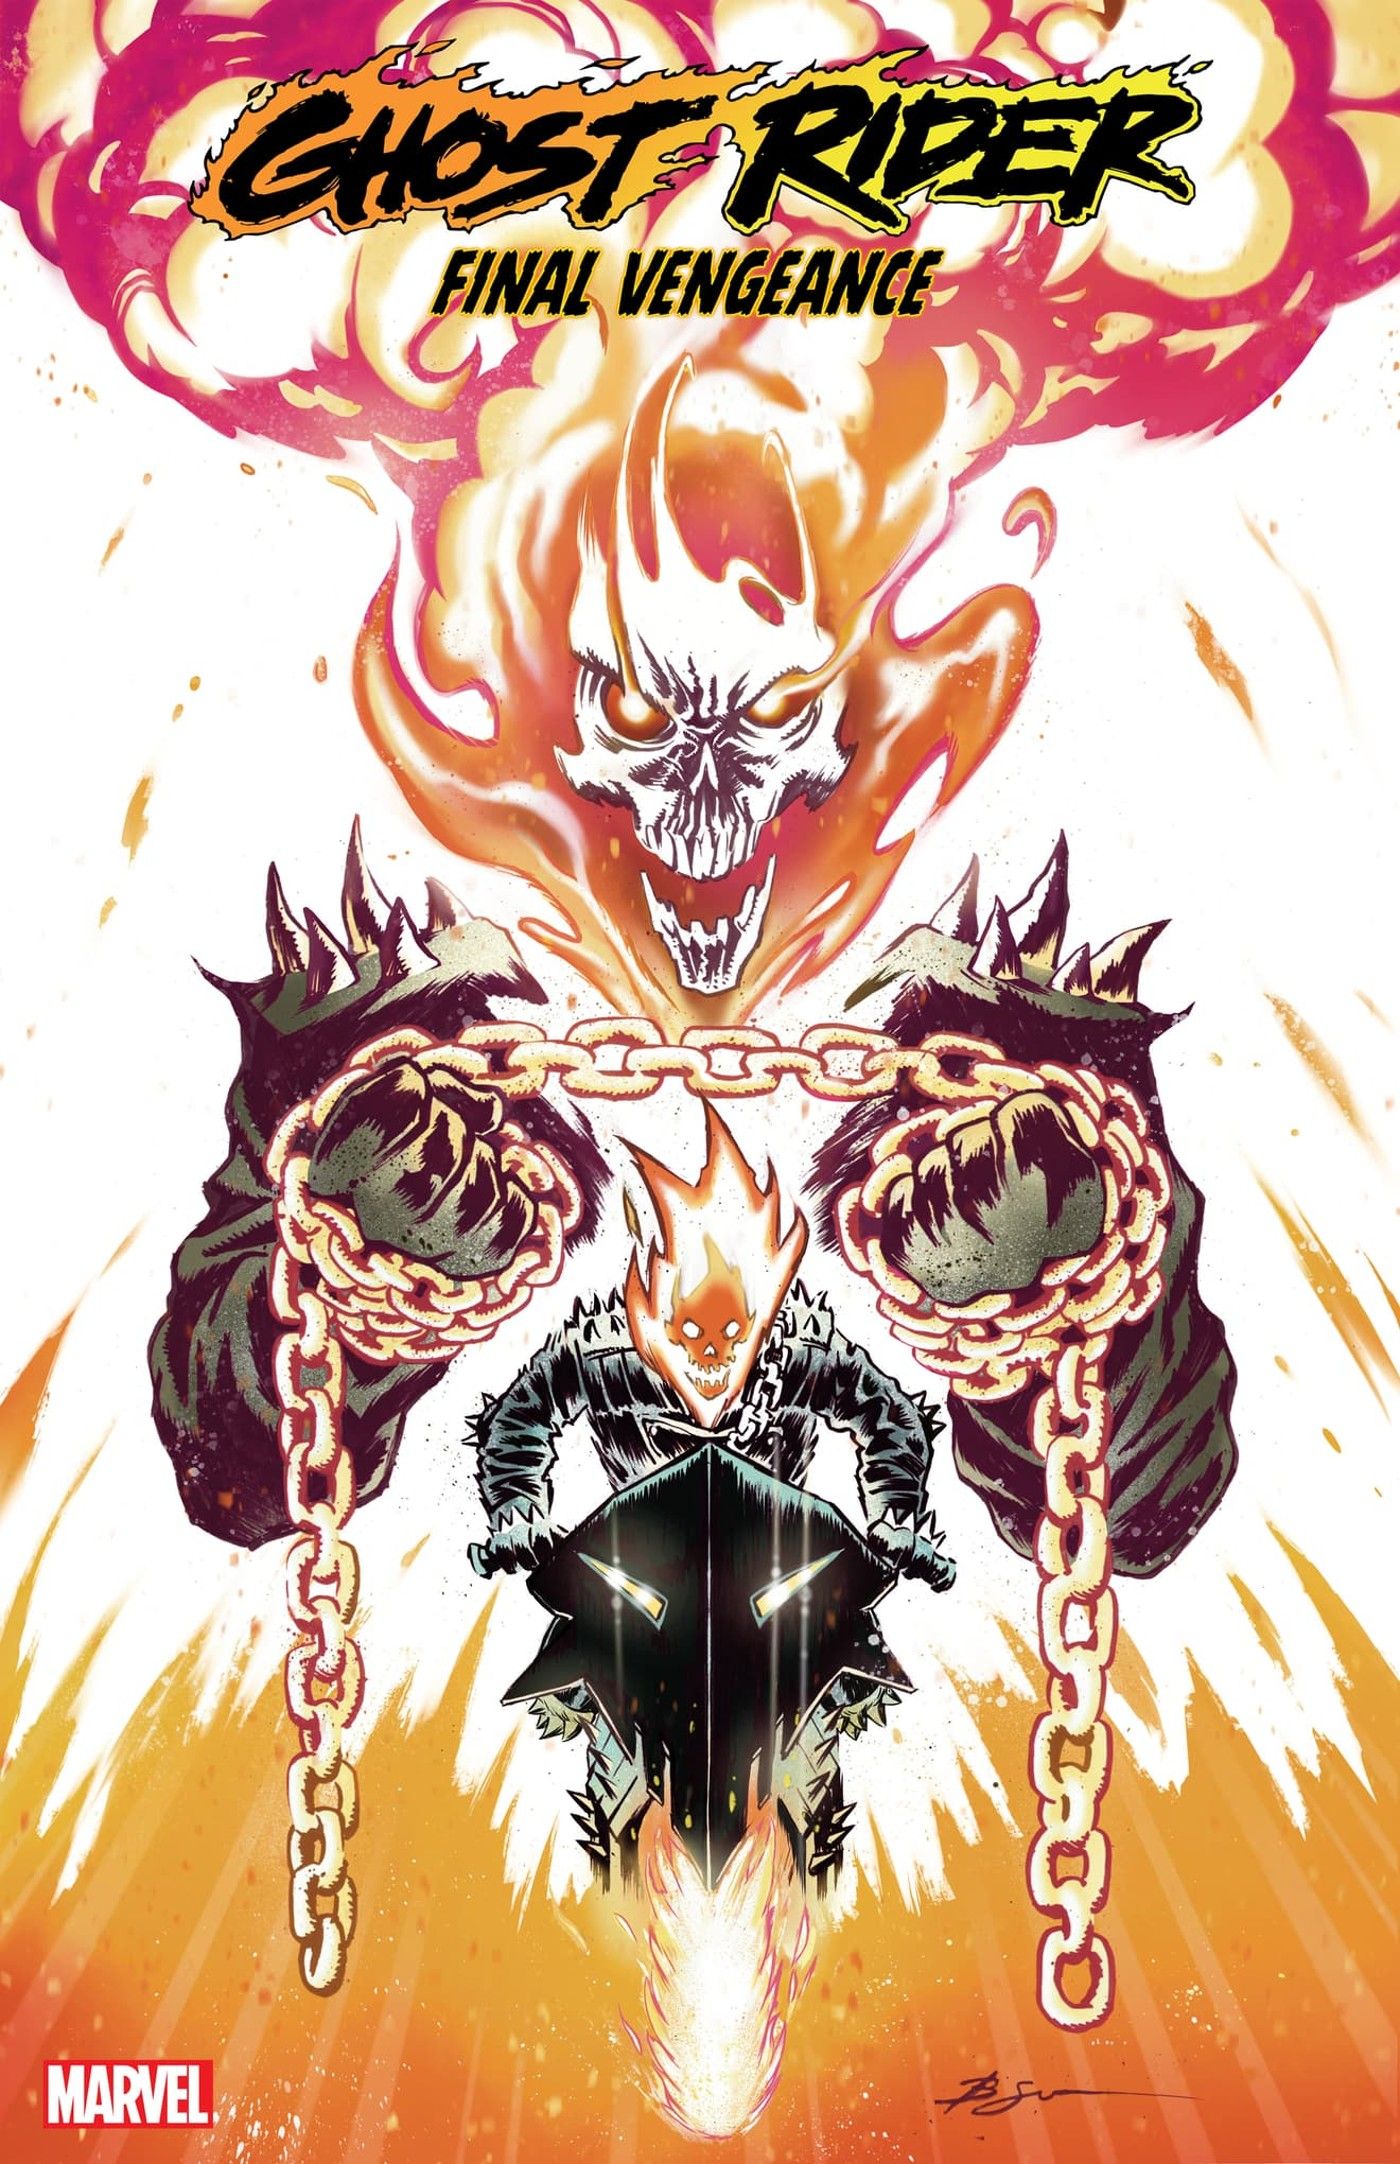 Cover to Ghost Rider: Final Vengeance, showing one Ghost Rider riding his cycle while another stands above him holding chains